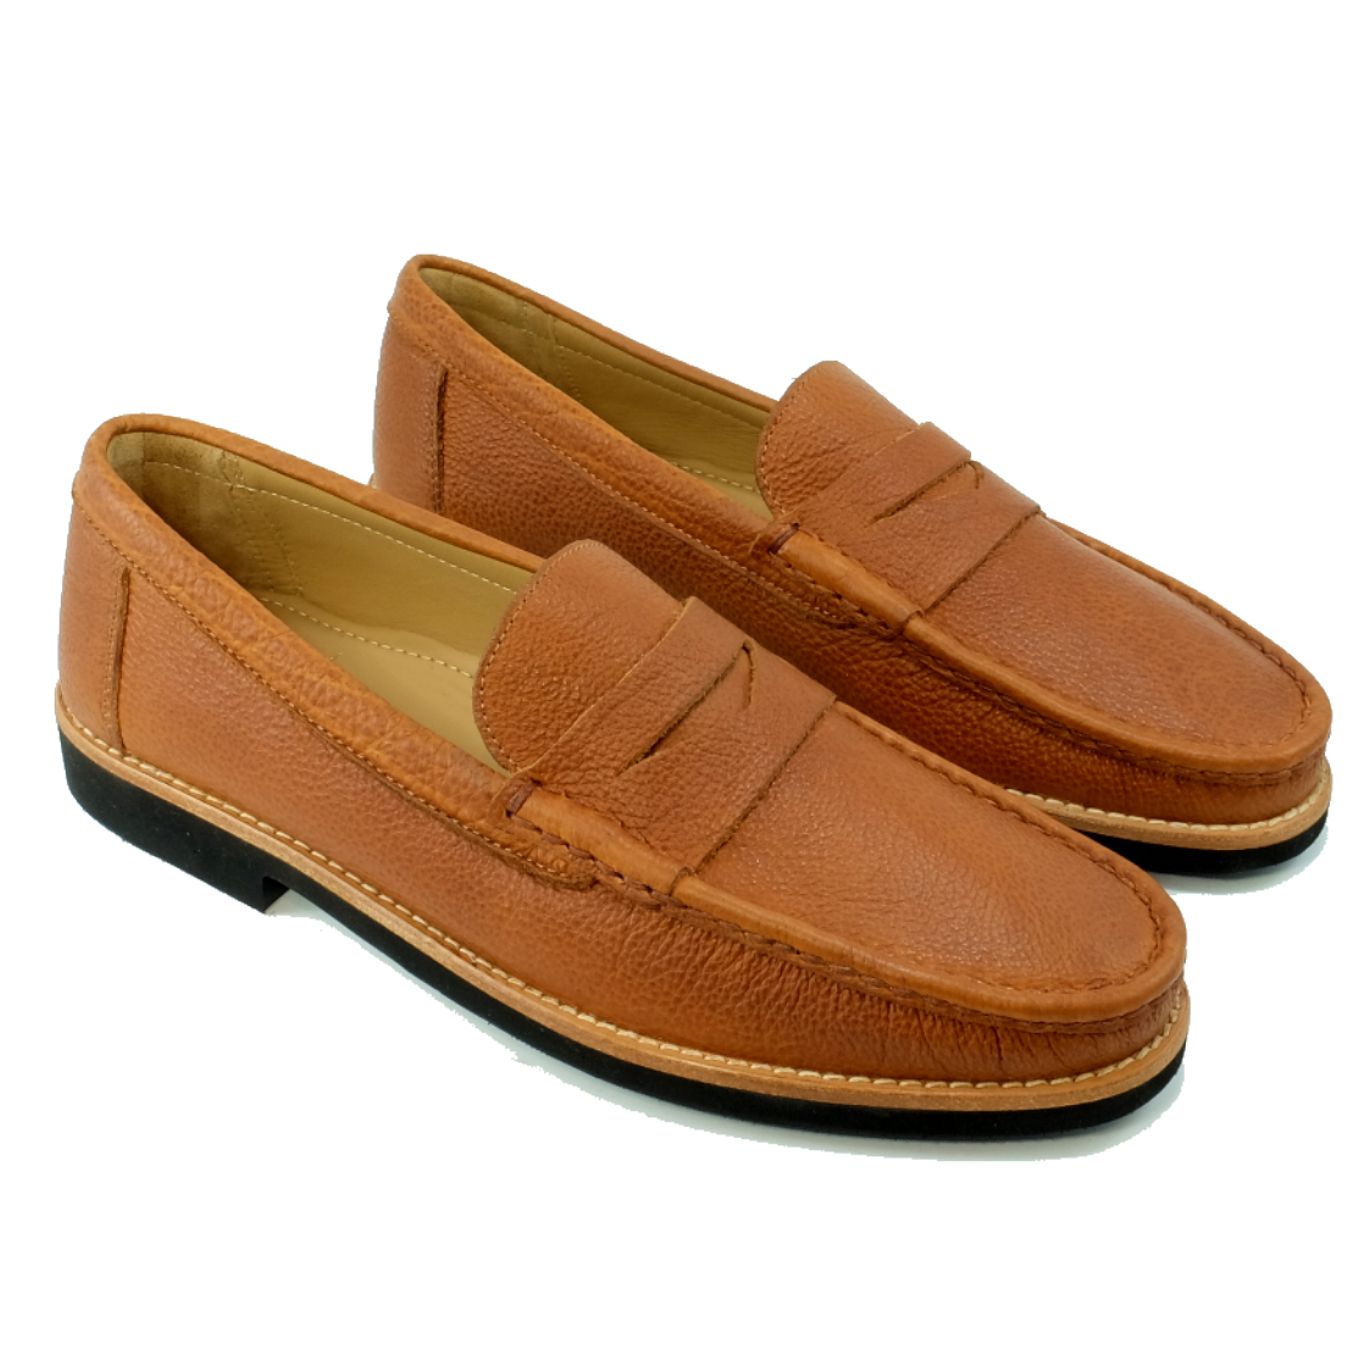 Worchester Bison Leather Penny Loafer in Tan by Alan Payne Footwear